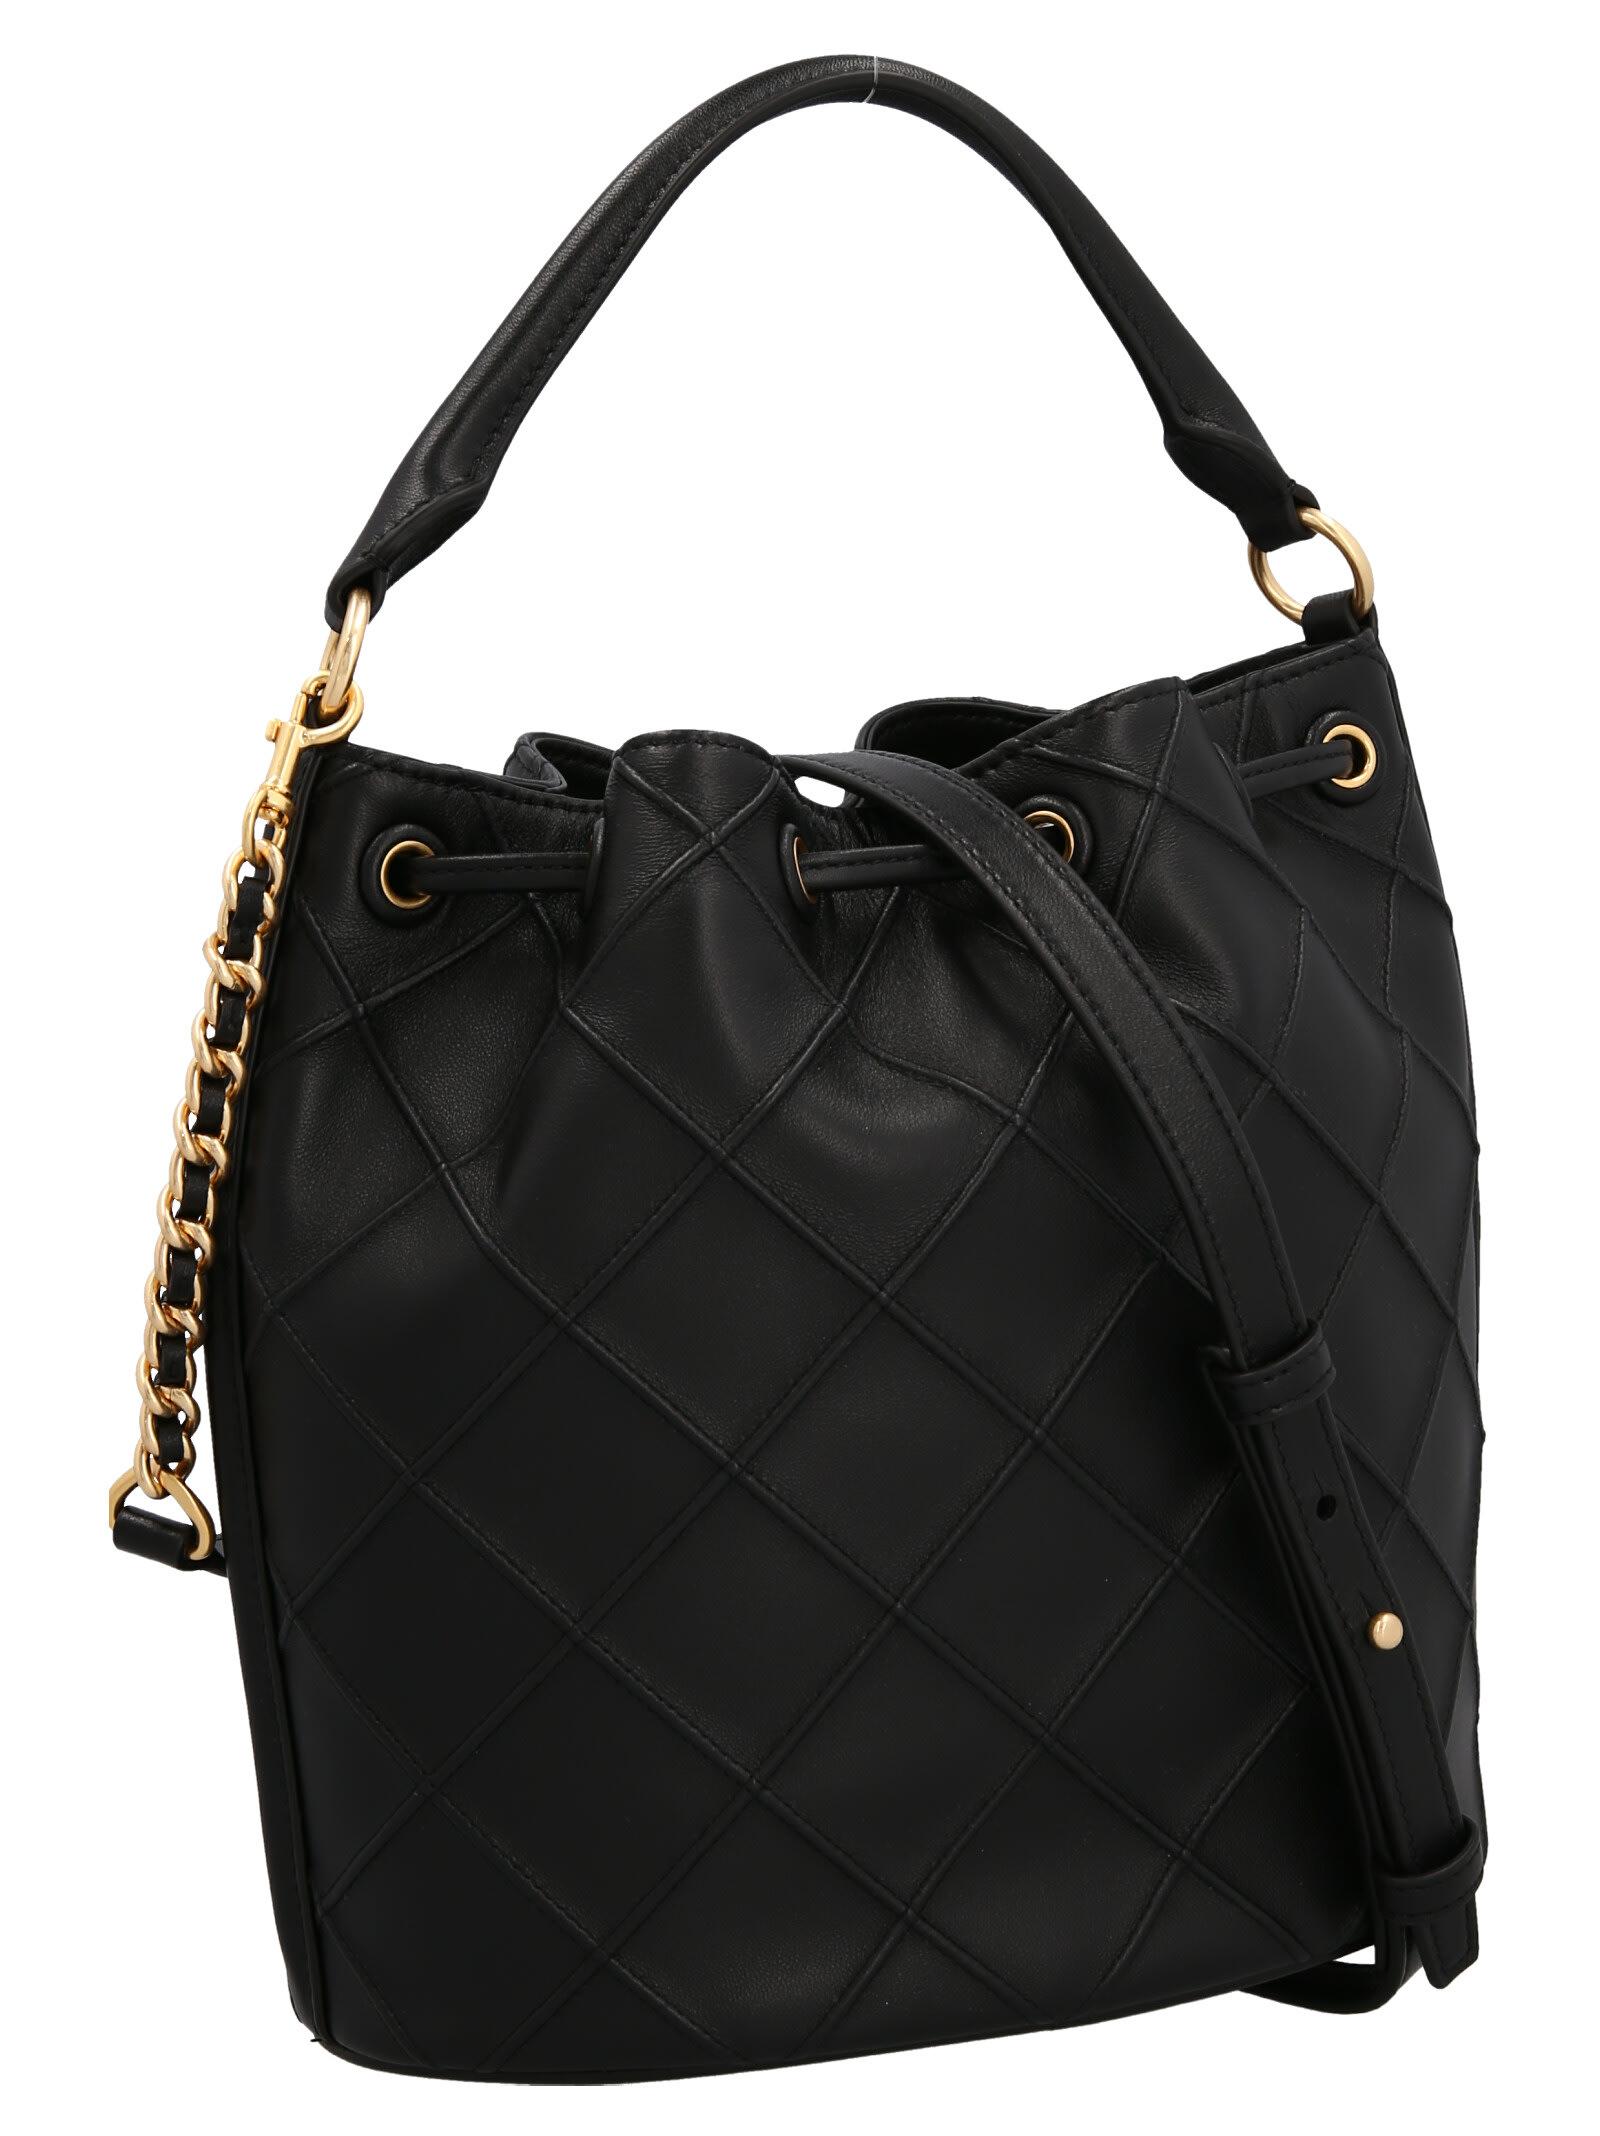 Tory Burch Decorated Large Leather Bucket Bag in Black